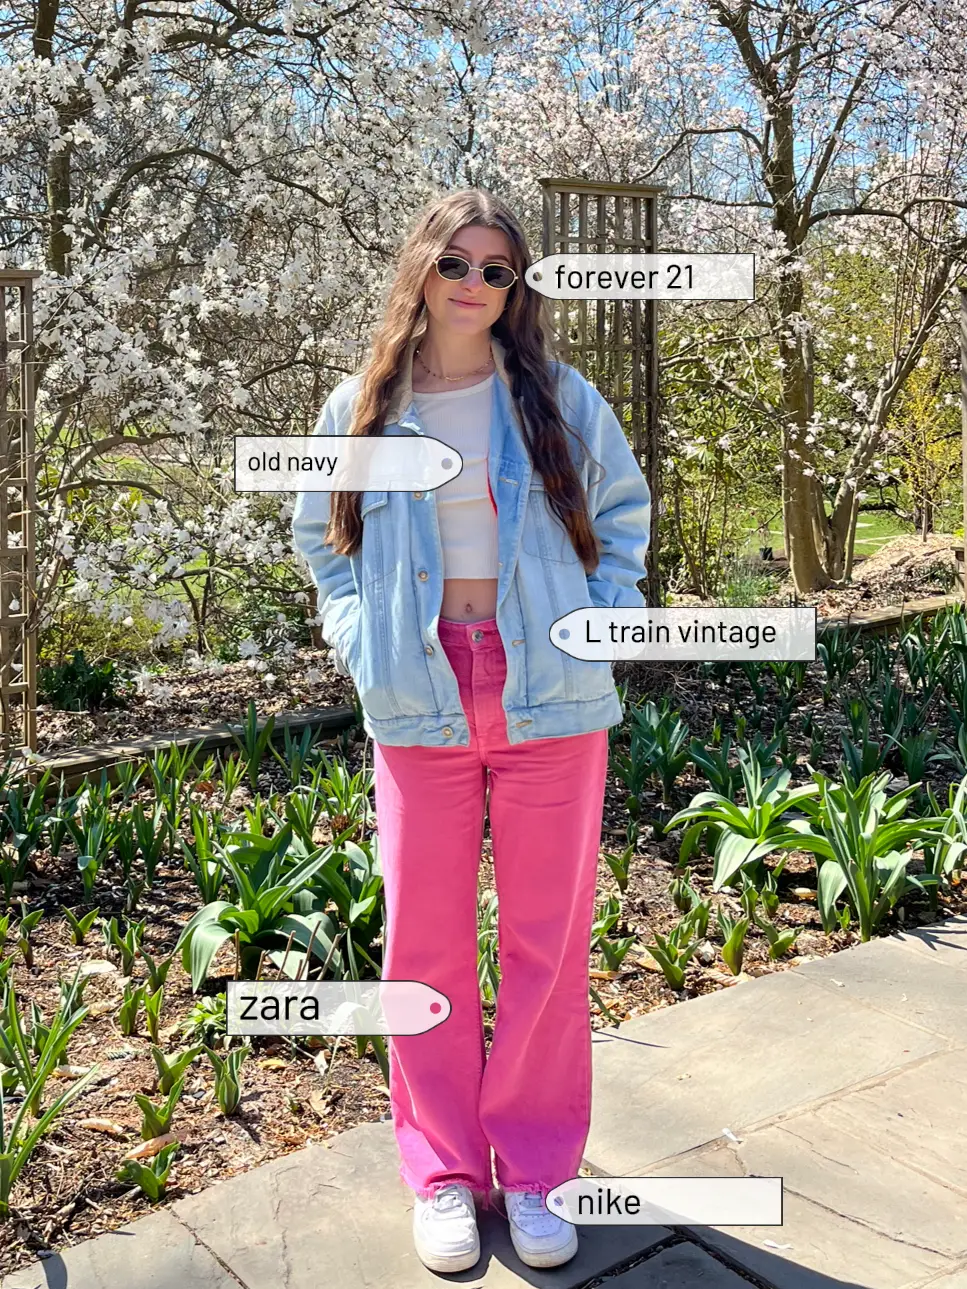  A woman wearing a denim jacket and pink pants is standing in front of a flower bed. The image is labeled with various fashion brands and descriptions.